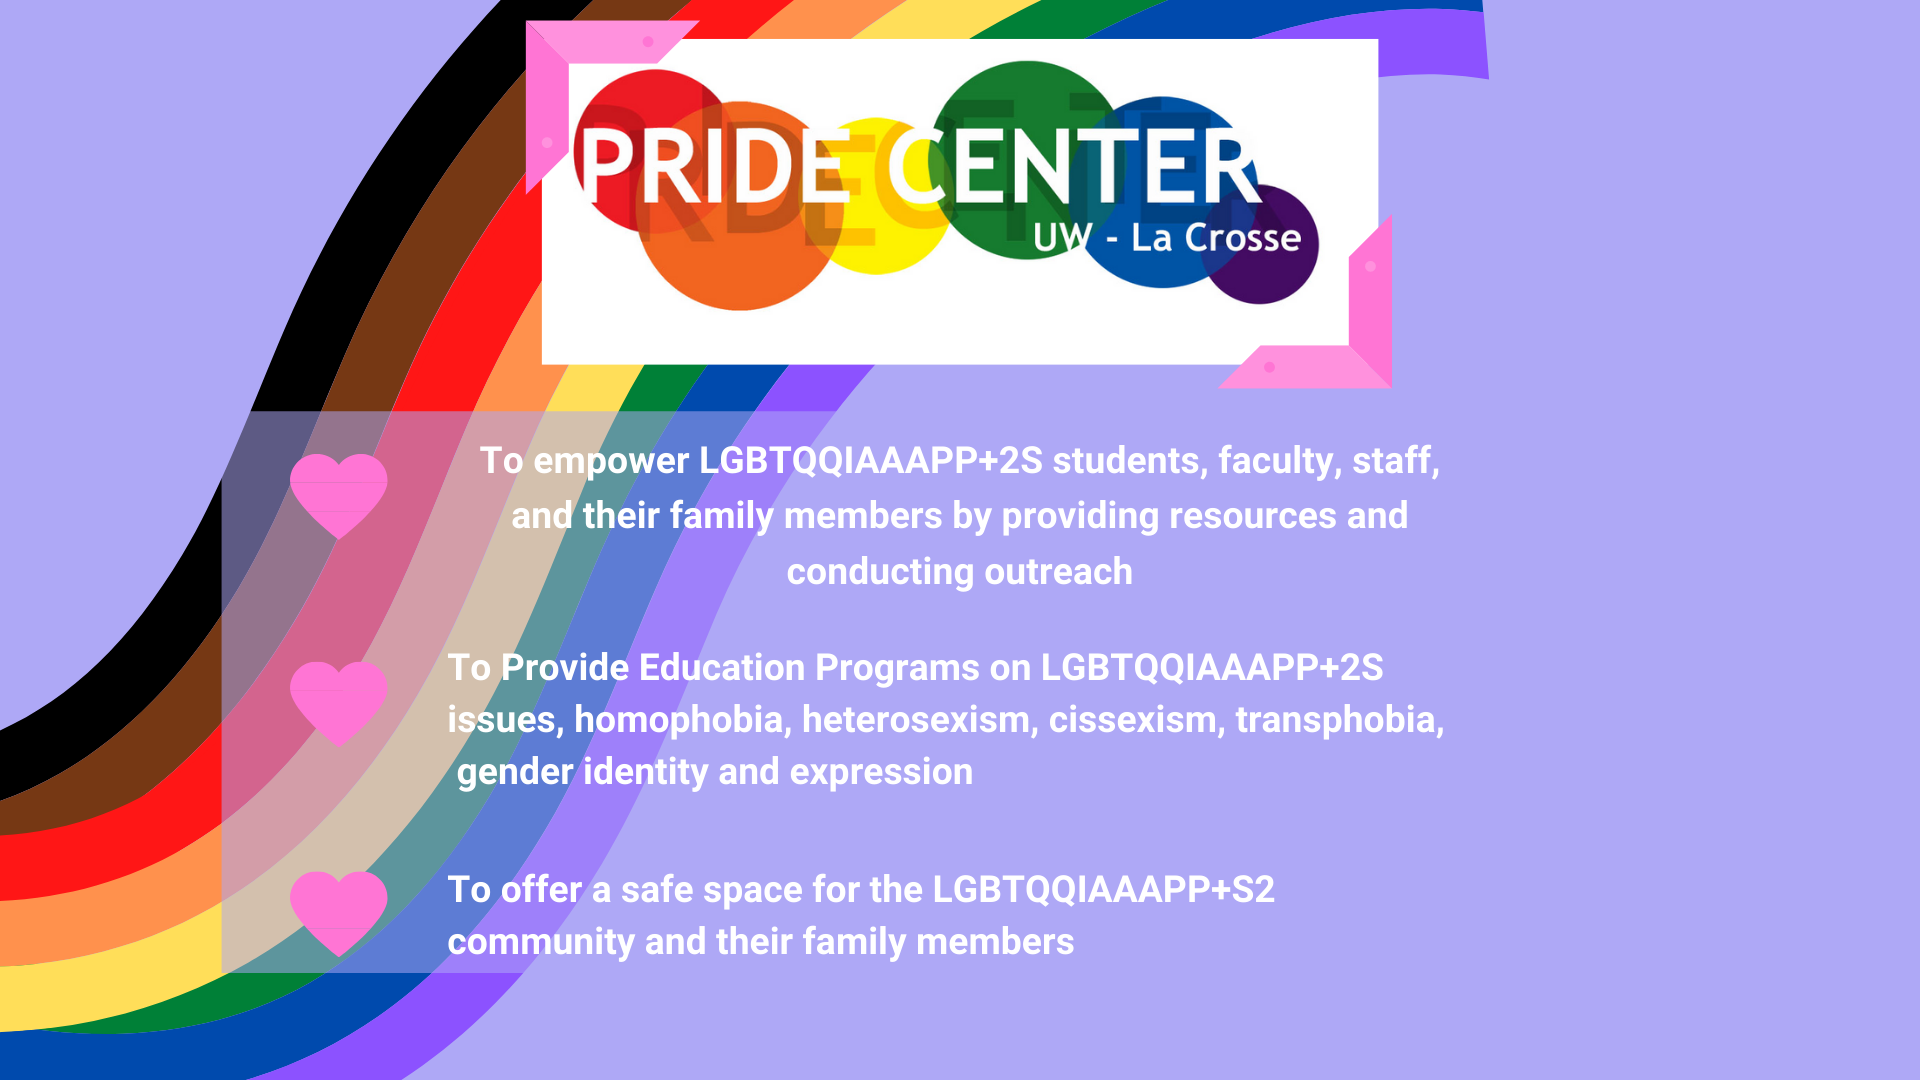 Purple Background with a rainbow, Pride Center Logo, and three goals the center promises to fulfill. The goals are "1. To empower LGBTQQIAAAP+2S students, faculty, staff, and their family members by providing resources and community outreach. 2. To Provide Education programs on LGBTQQIAAAP+2S issues, homophobia, heterosexism, cissexism, transphobia, gender identity, and gender expression. 3. To offer a safe space for the LGBTQQIAAAP+2S community and their family members." 